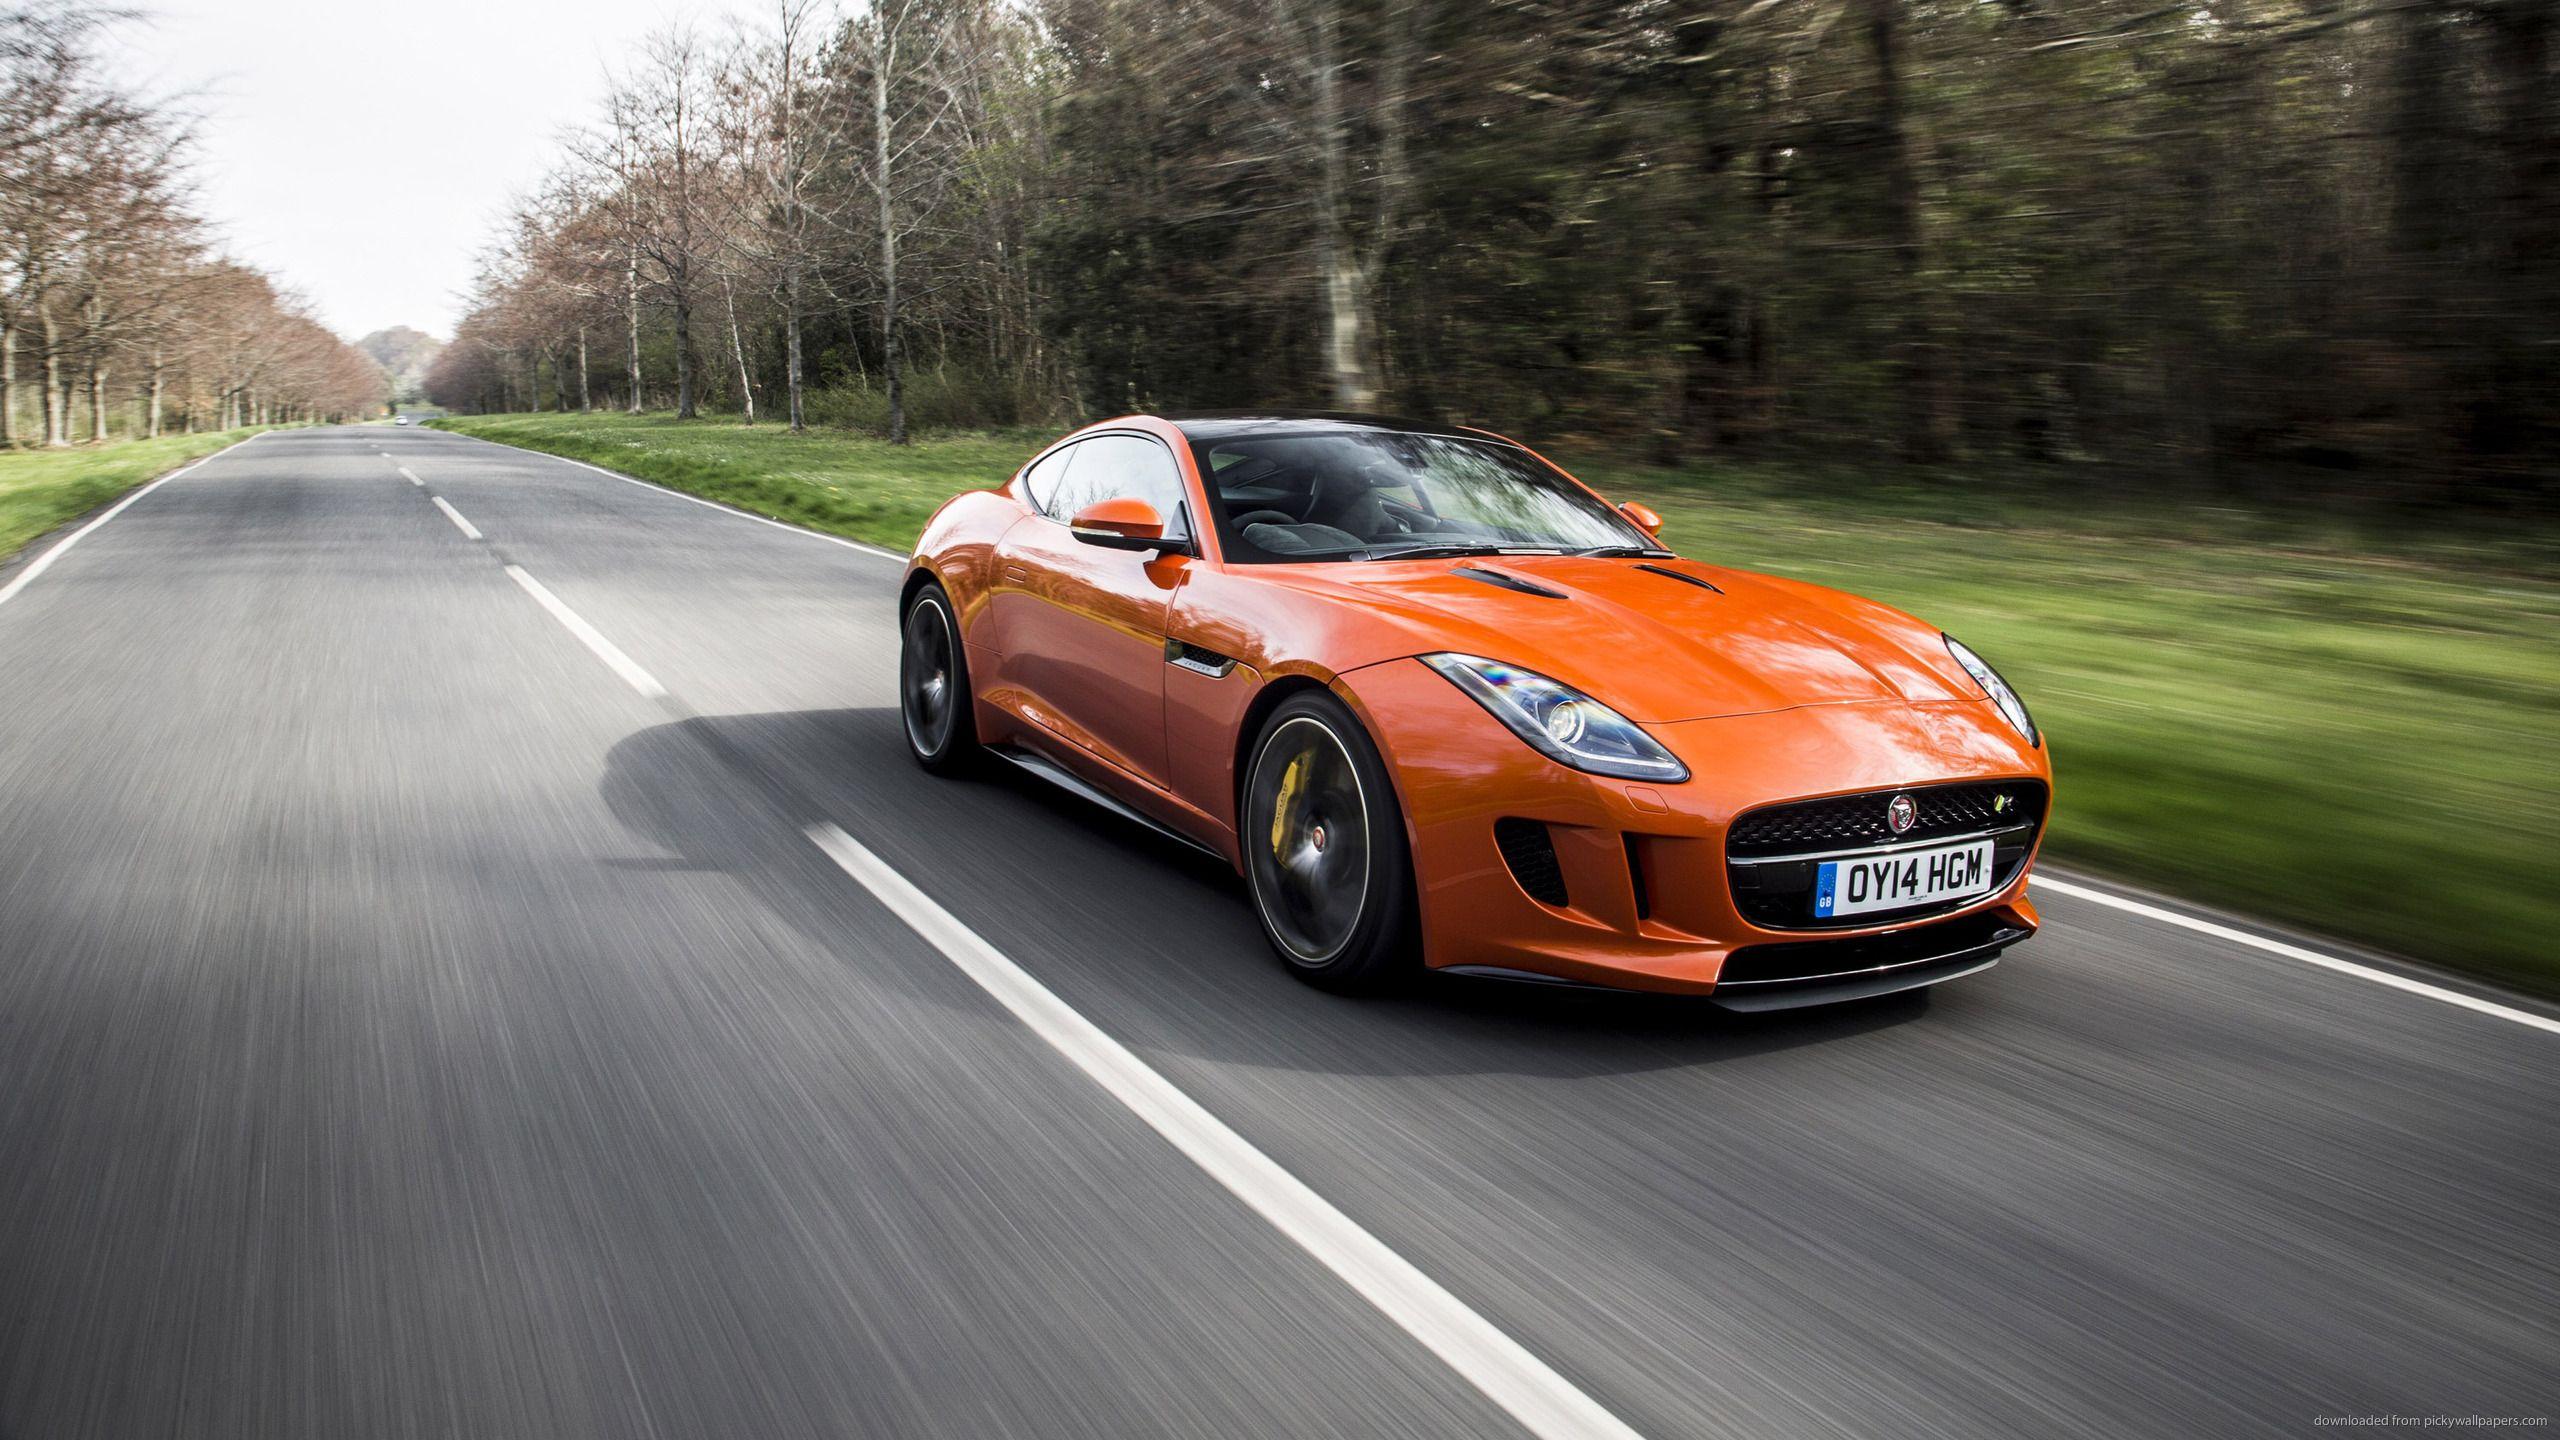 Download 2560x1440 Jaguar F TYPE R Coupe On The Road Wallpaper